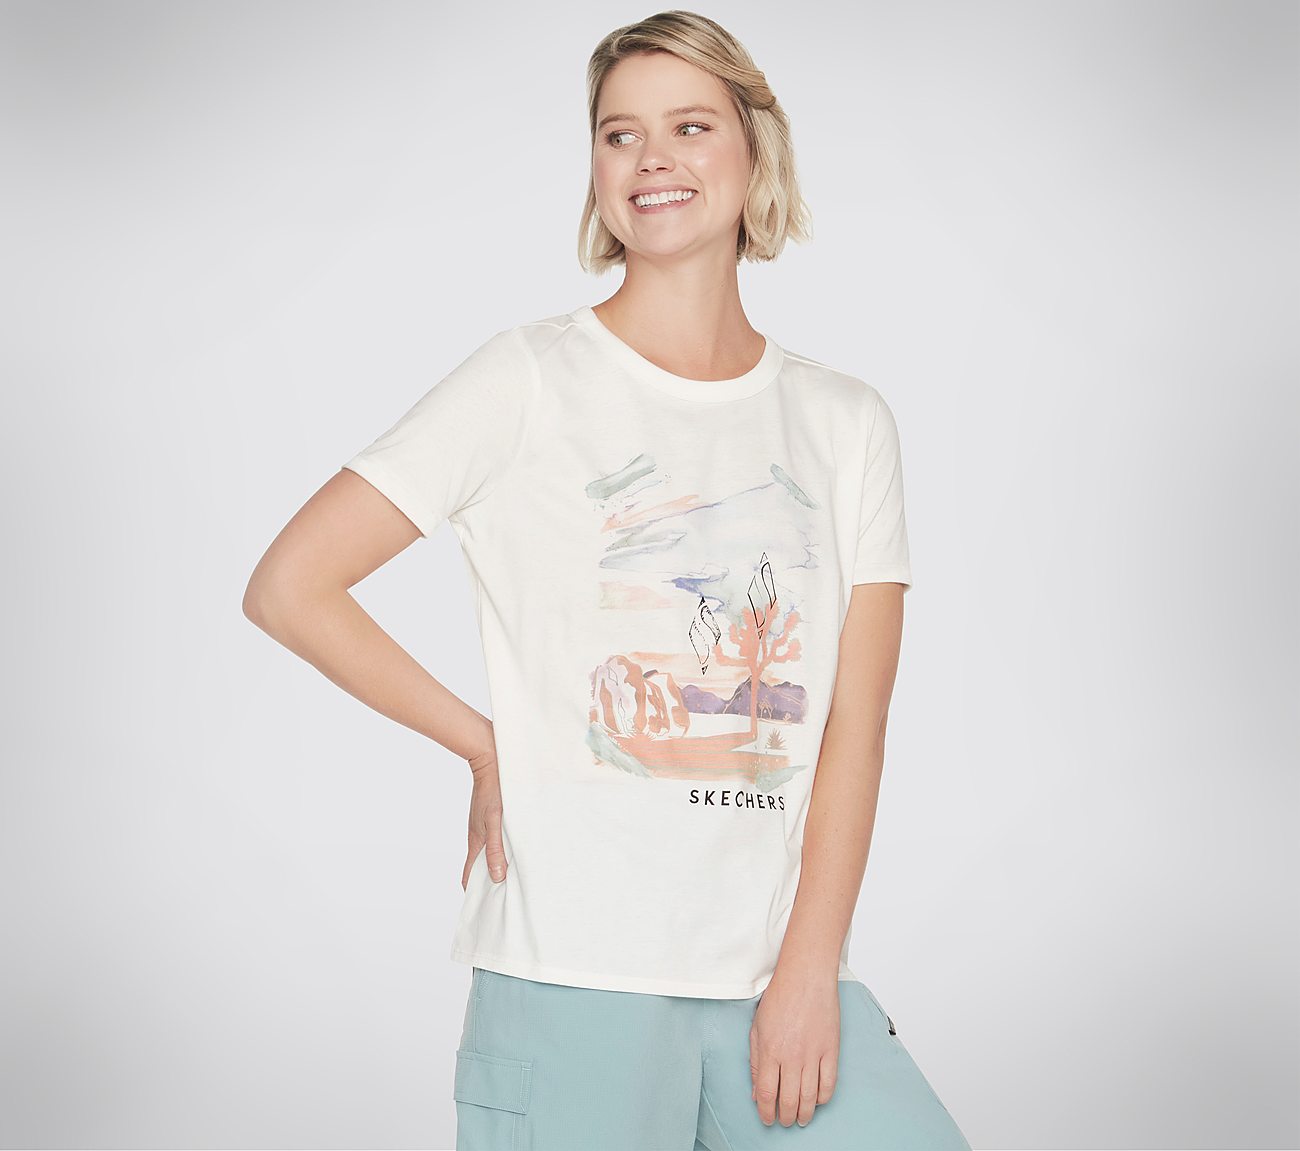 Airbrush T-shirt Clothes Skechers